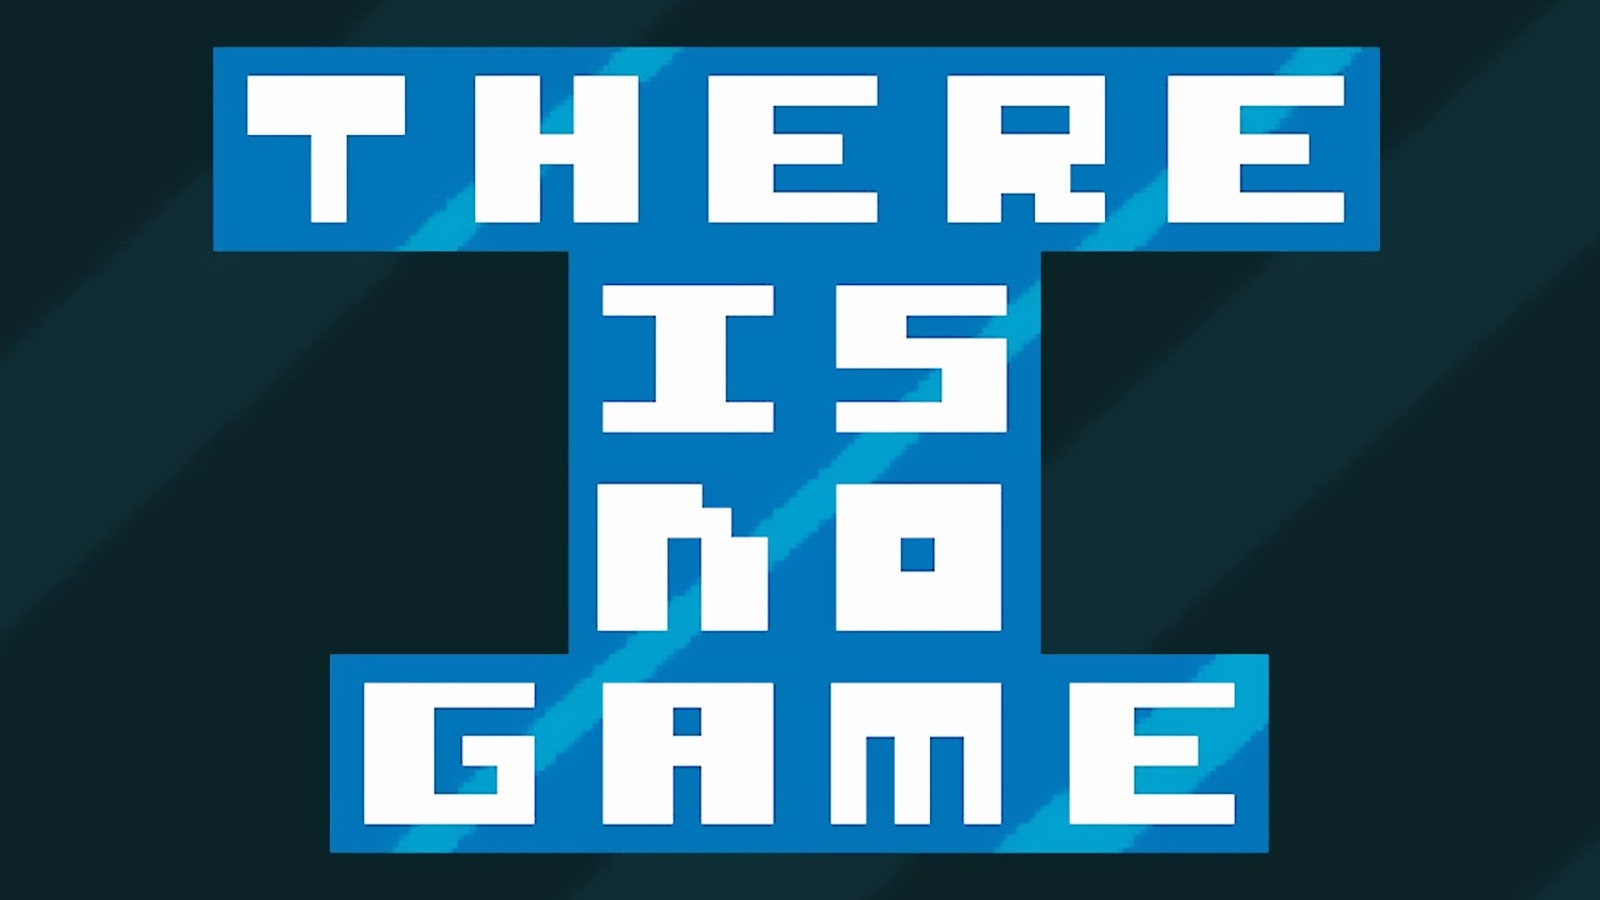 Другие игры нету. There is no game. There is not game. Здесь нет игры игра. This is not a game.